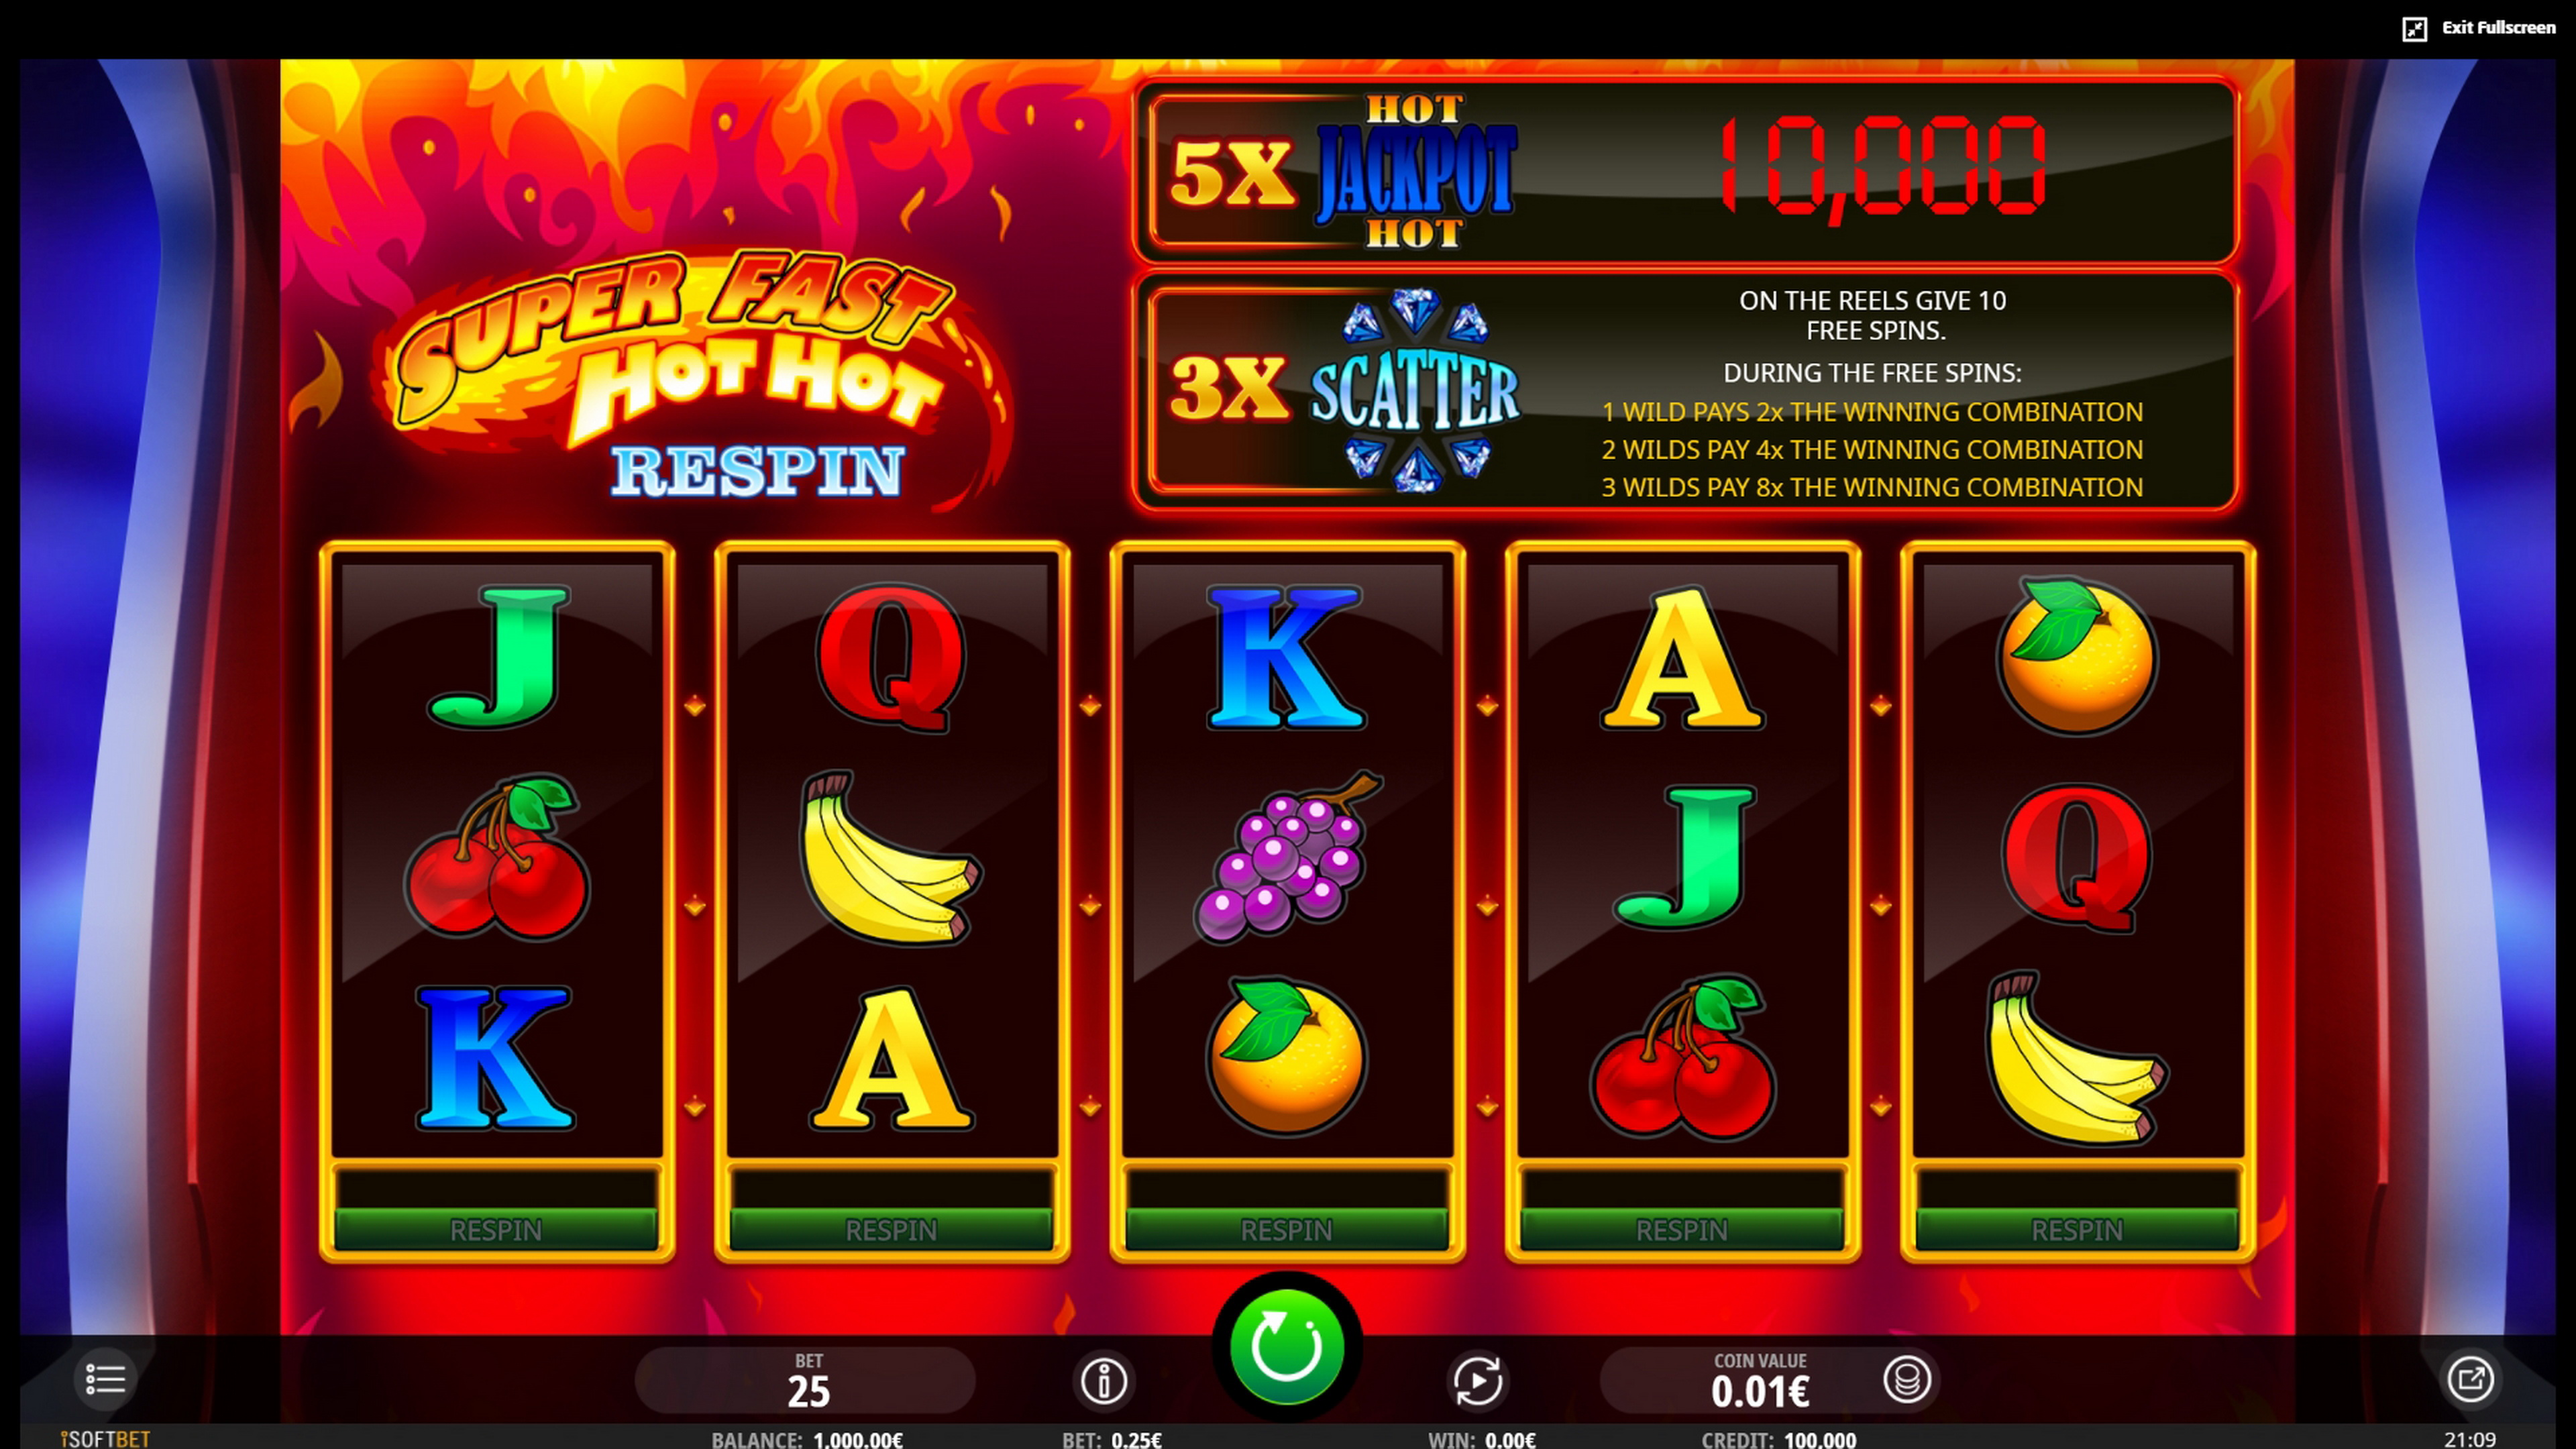 Reels in Super Fast Hot Hot Respin Slot Game by iSoftBet